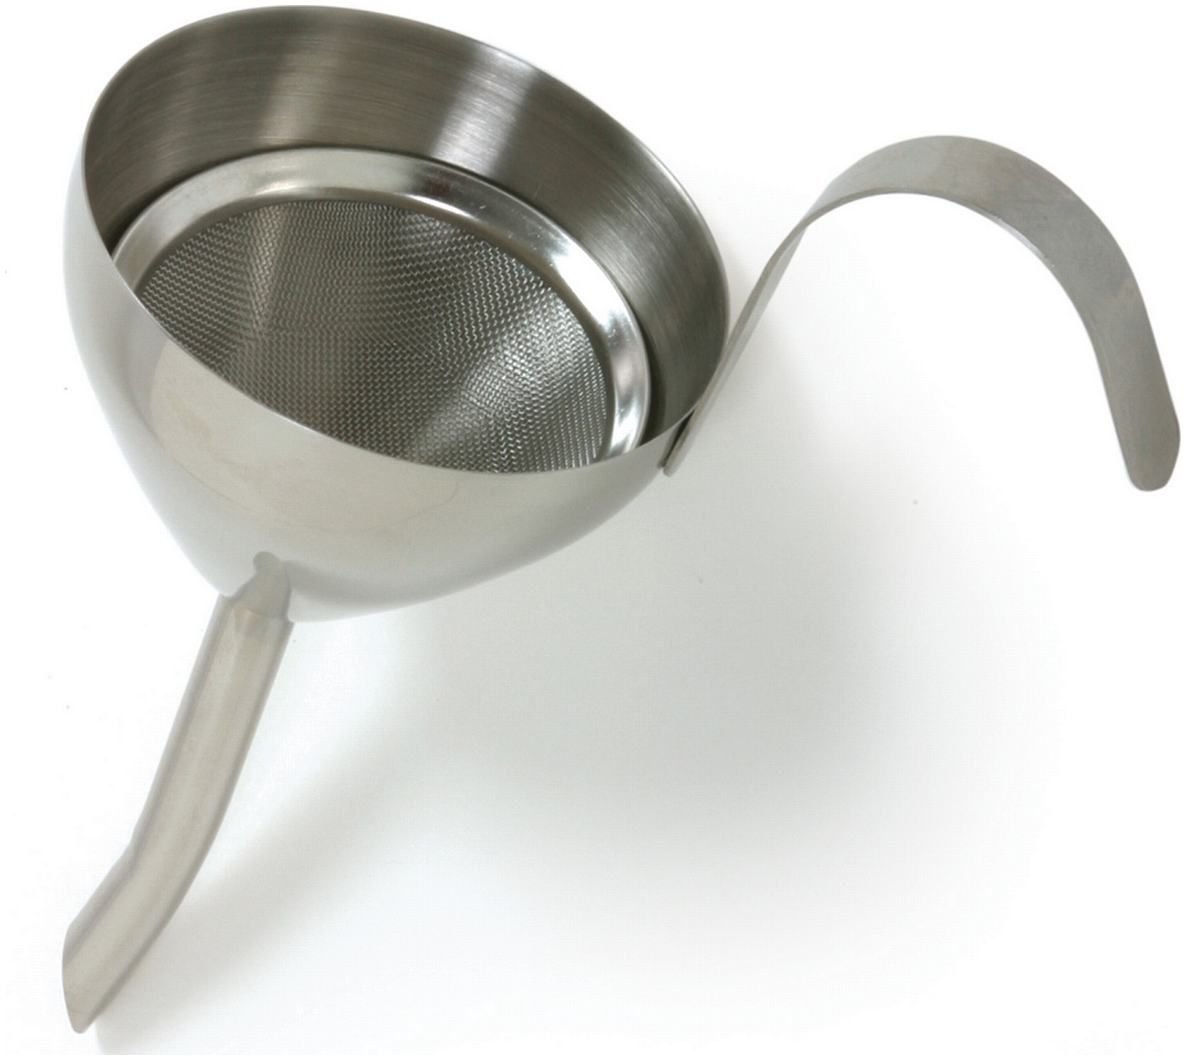 https://cdn.everythingkitchens.com/media/catalog/product/cache/70d878061ea71e5b62358b2b67547186/n/o/norpro-funnel-with-removable-strainer-view-242-compressed.jpg